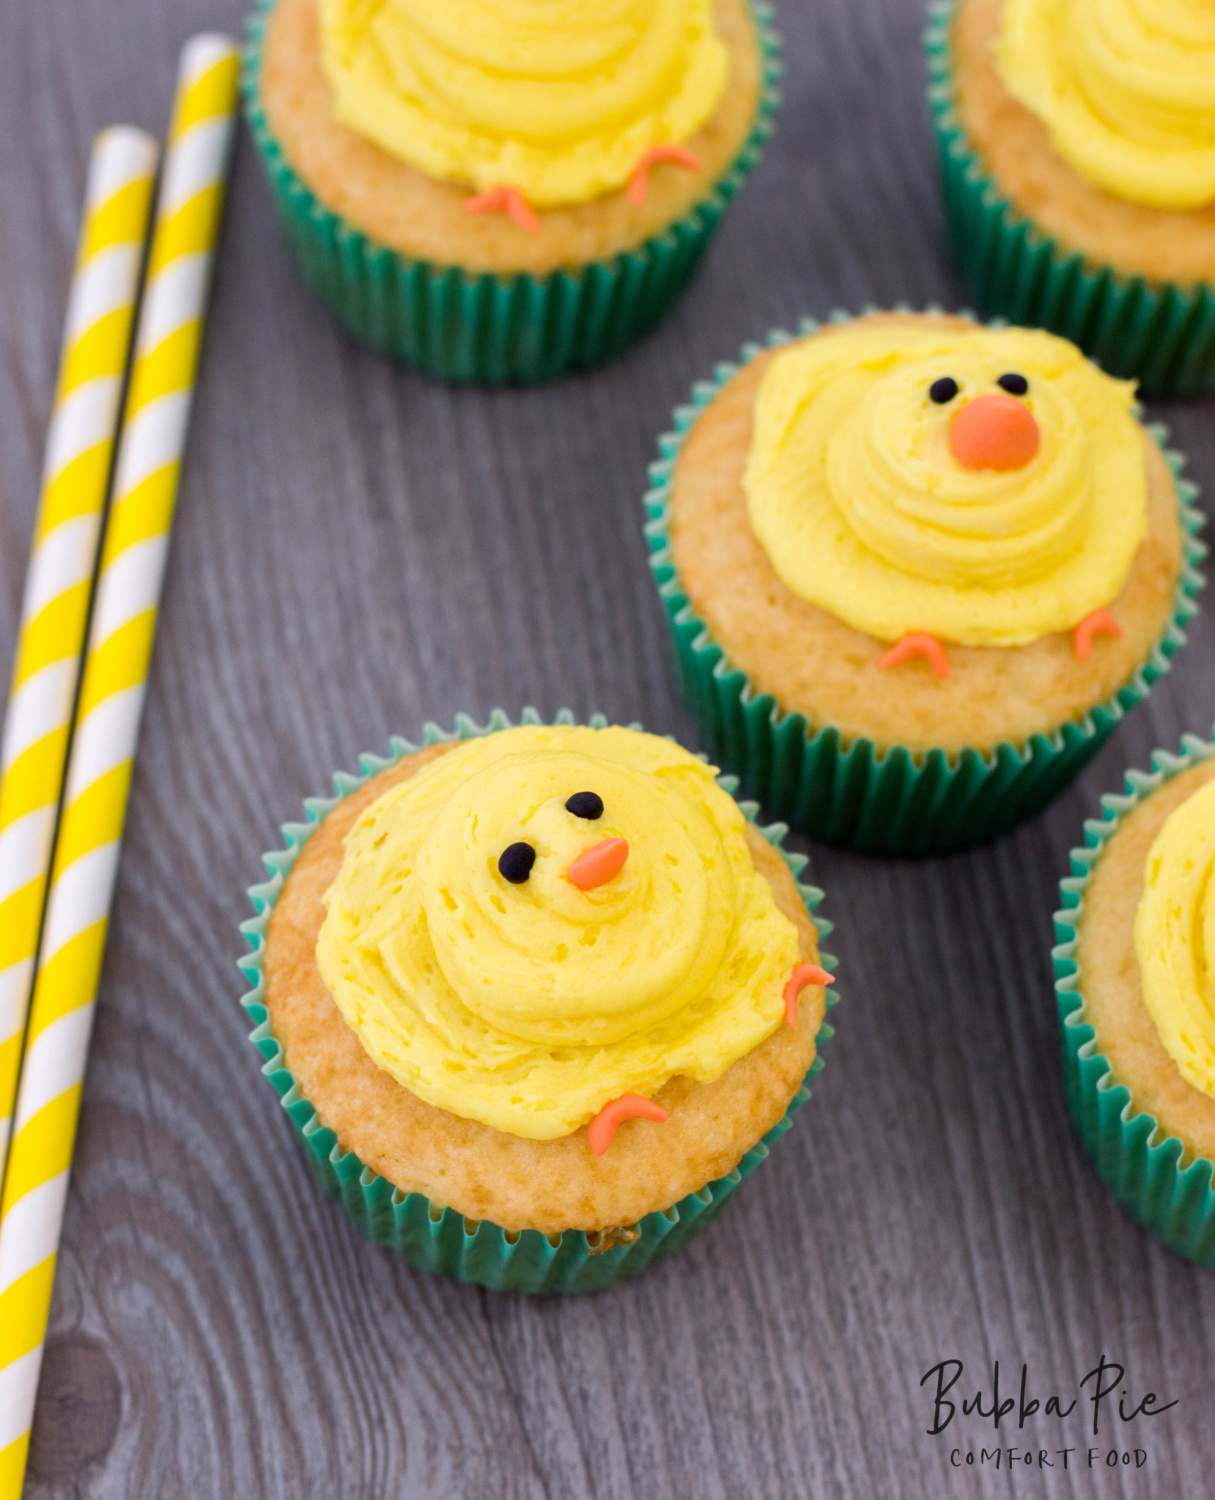 buttercream frosting is the key to these delicious Easter Cupcakes with baby chicks on them